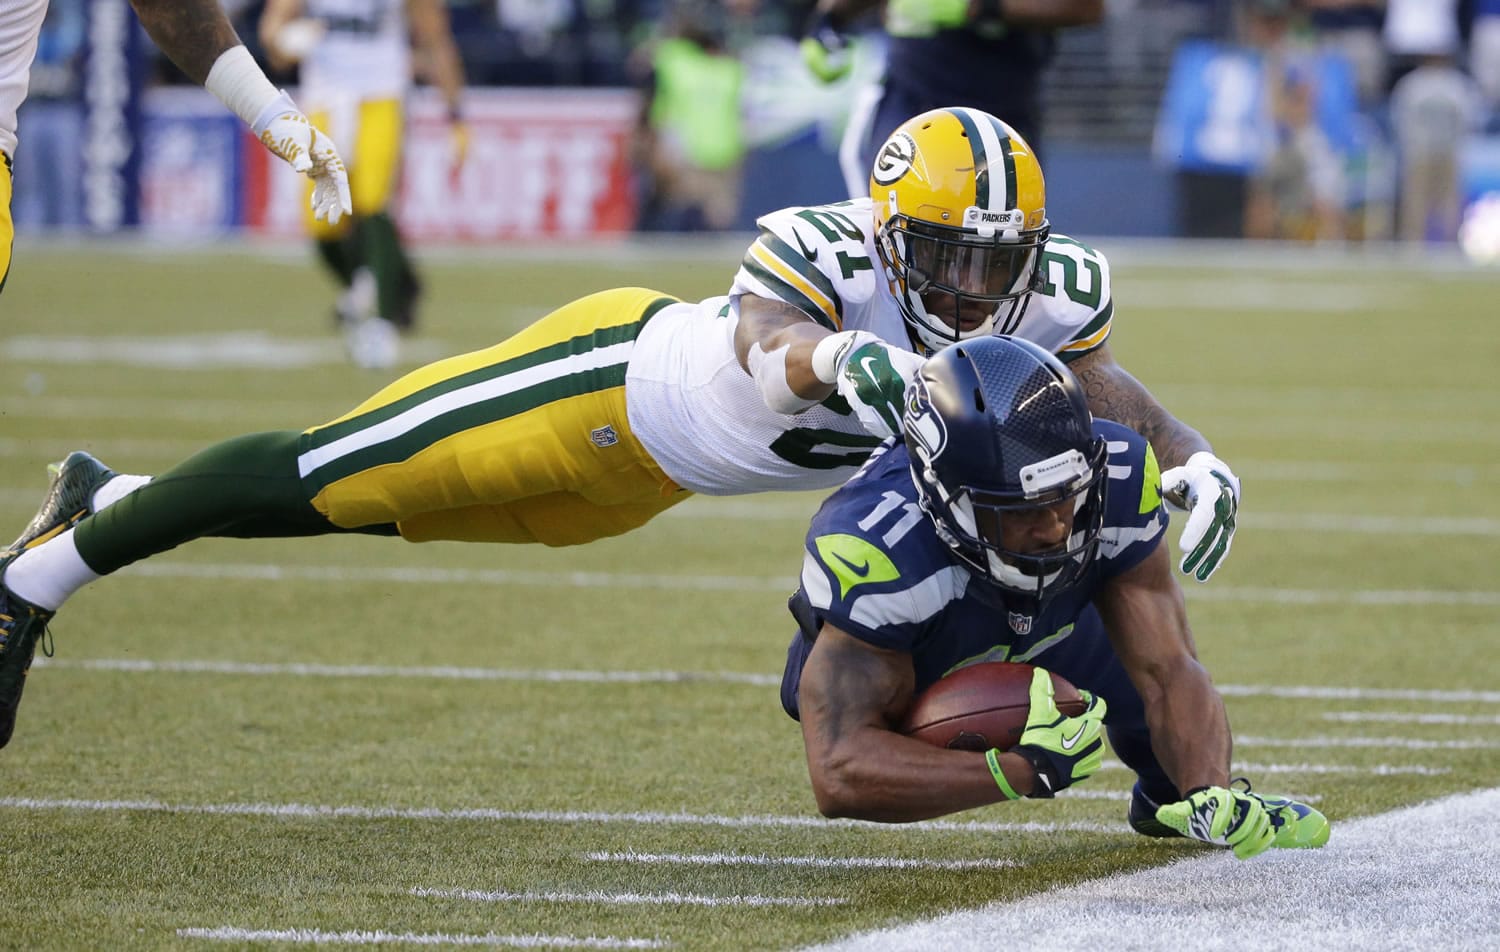 Green Bay Packers free safety Ha Ha Clinton-Dix (21) tackles Seattle Seahawks wide receiver Percy Harvin (11) after a pass reception during the first half of an NFL football game, Thursday, Sept. 4, 2014, in Seattle.